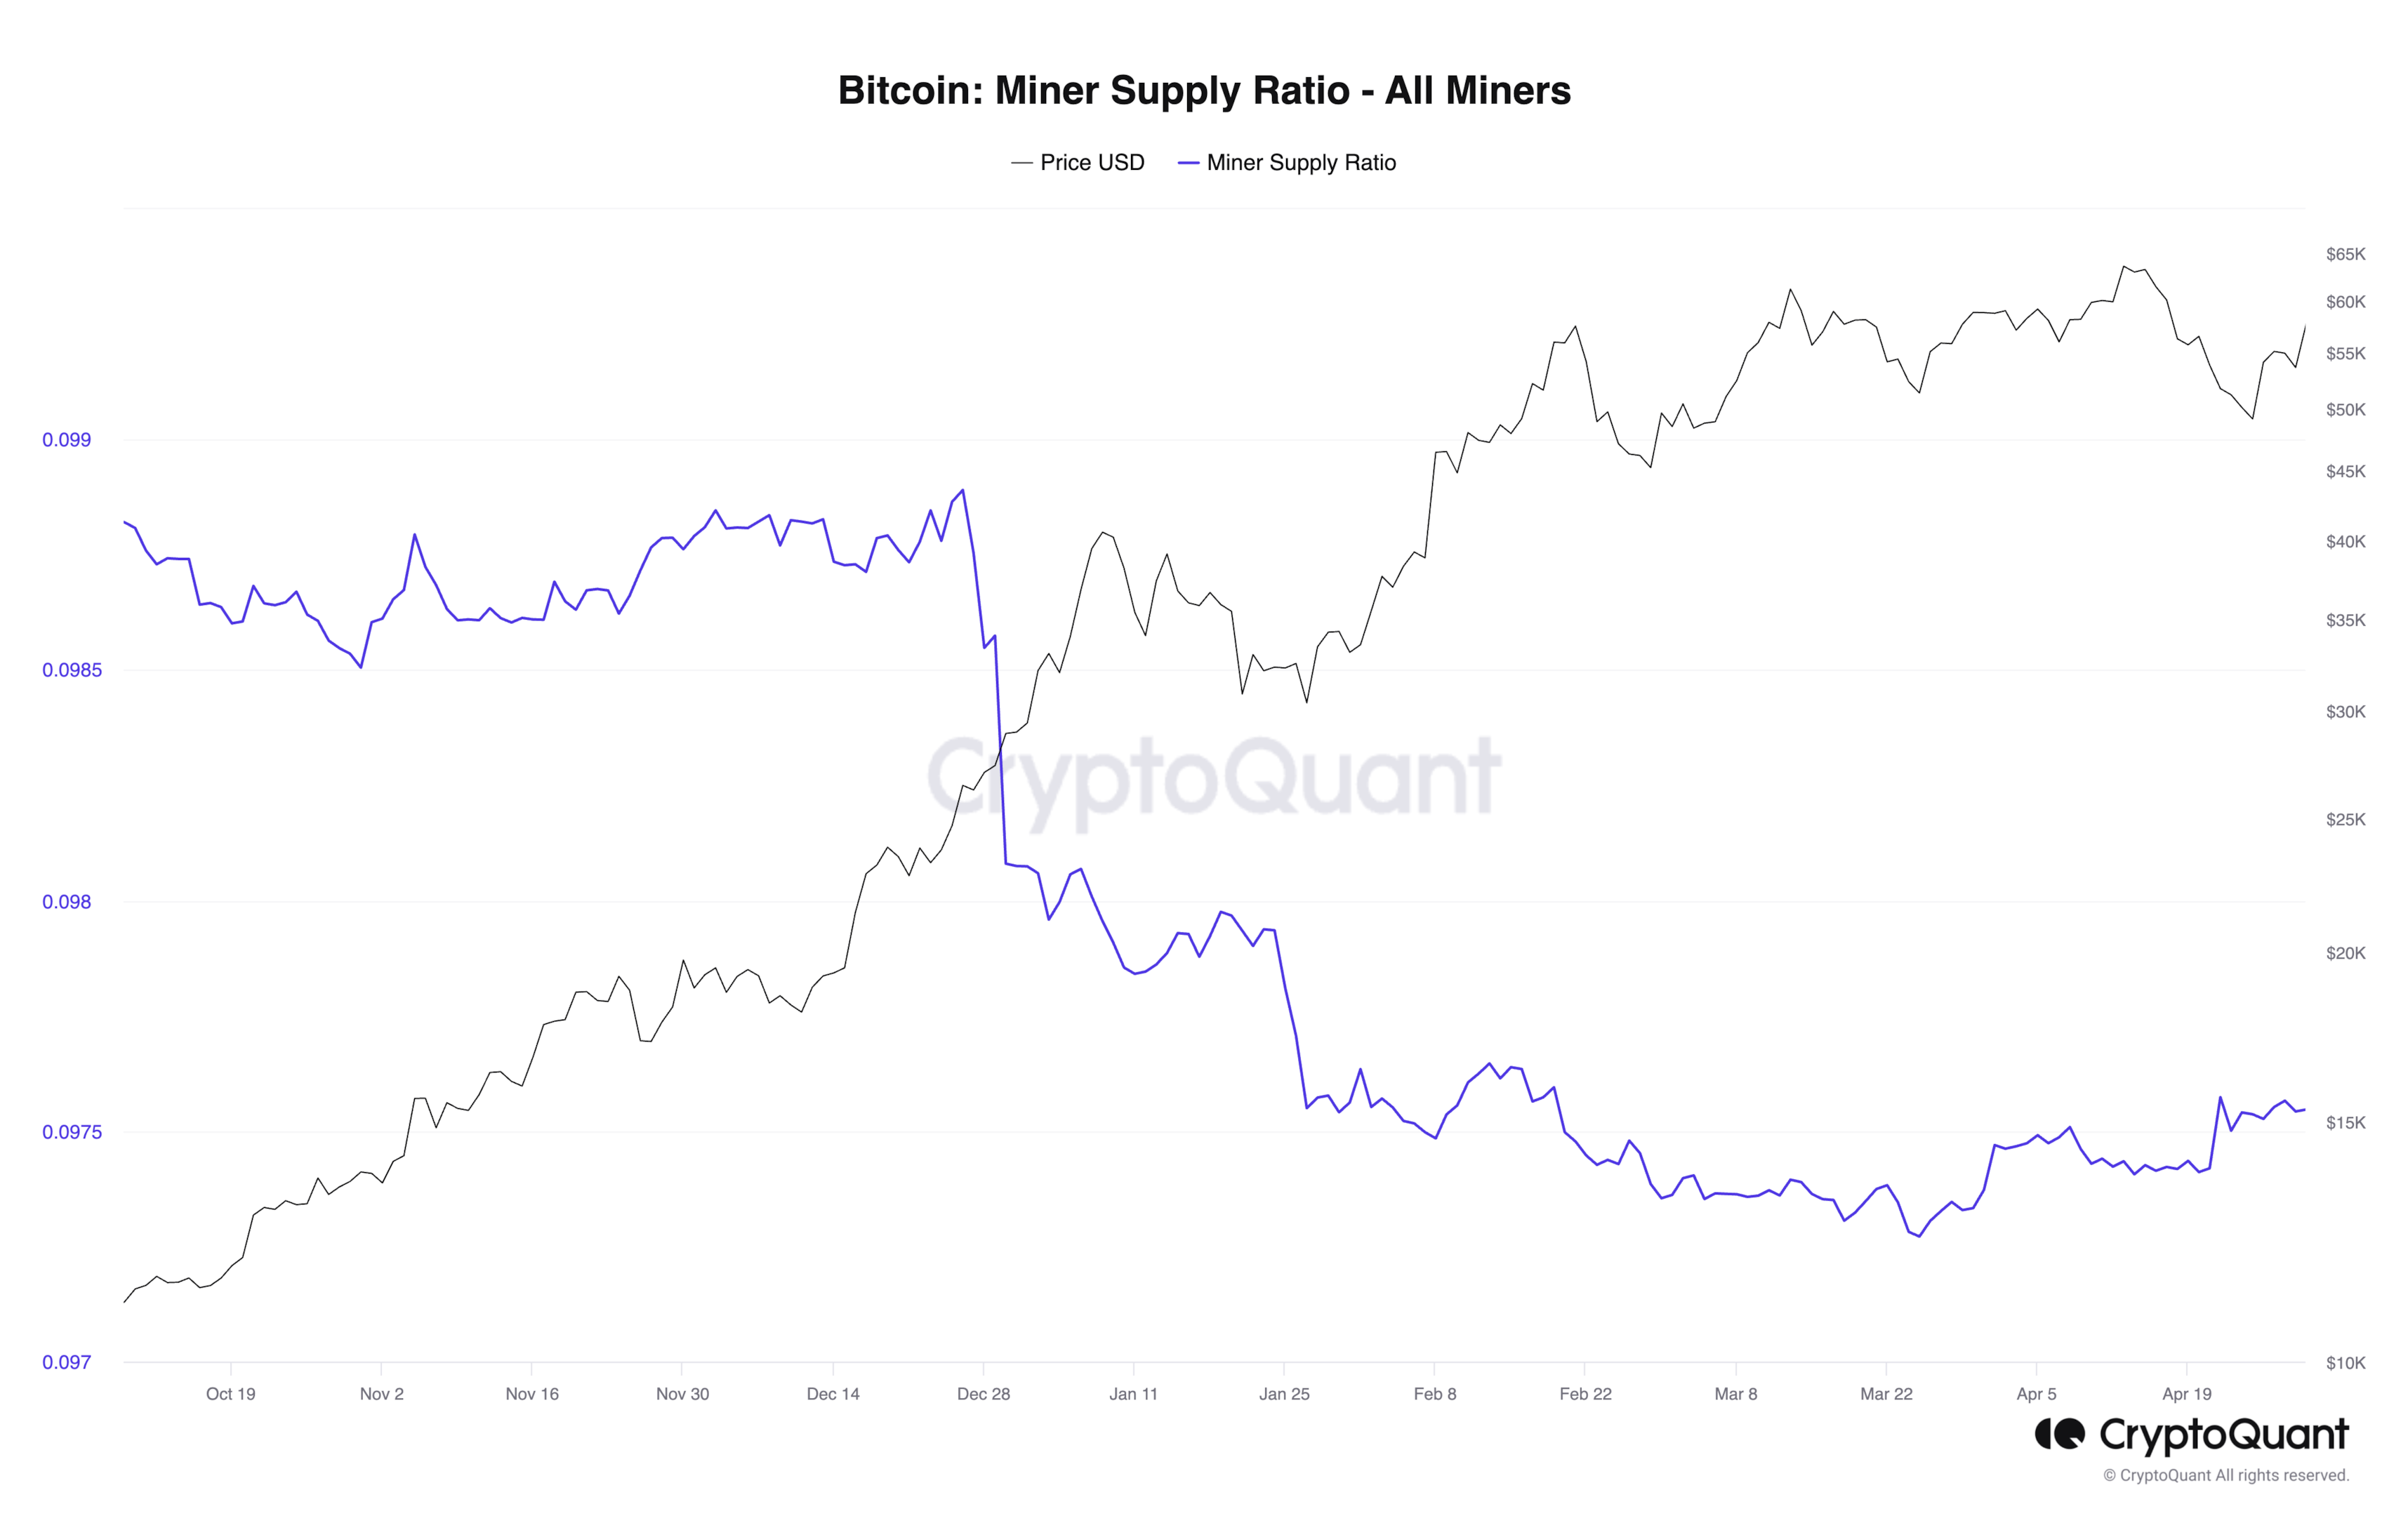 Bitcoin: Miner Supply Ratio - All Miners. Source: CryptoQuant